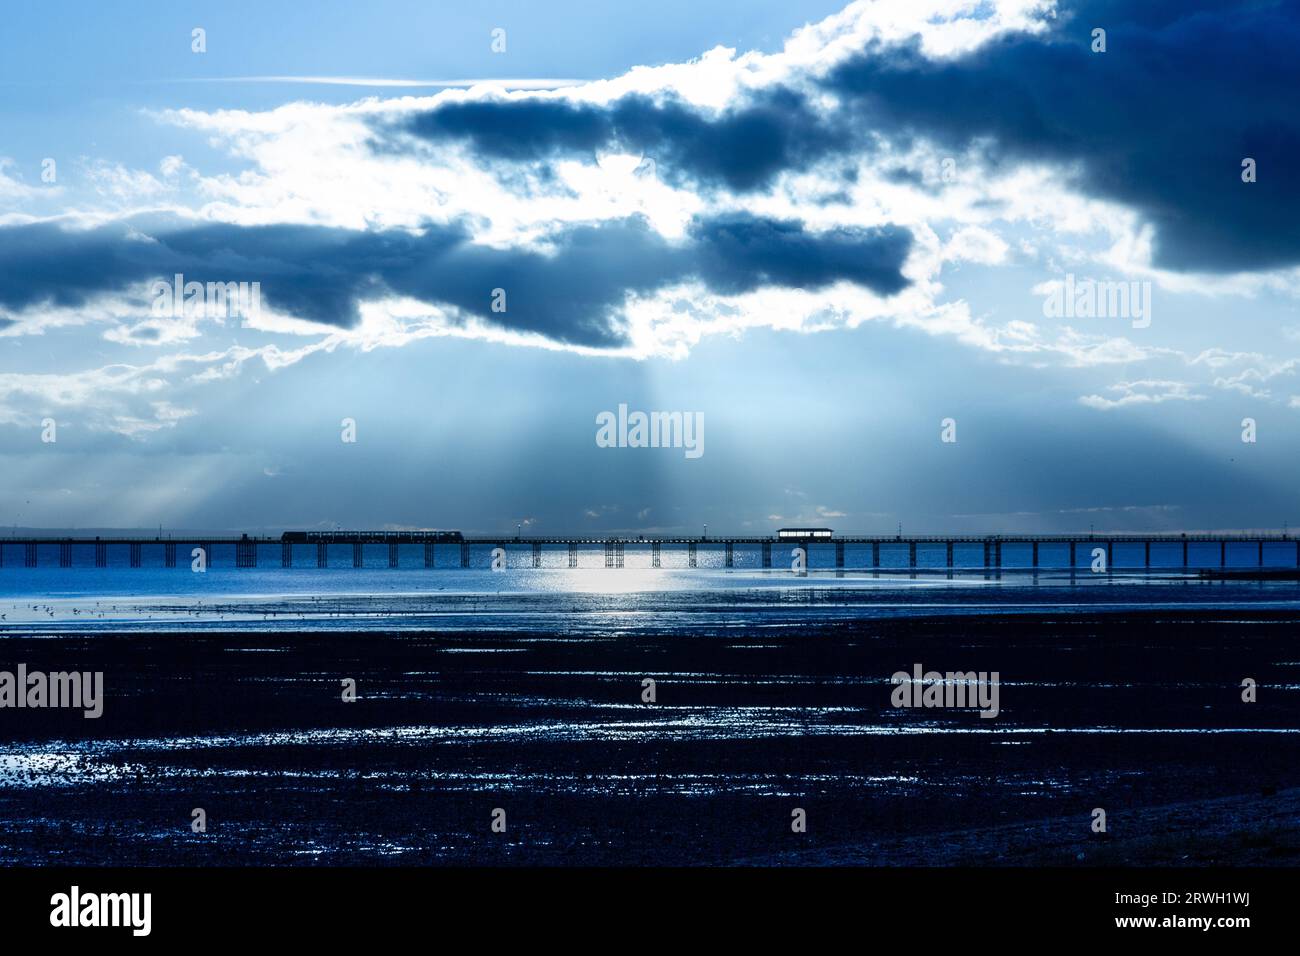 A distant view of Southend Pier at dusk with rays of light breaking through the clouds. The tide is out. Stock Photo